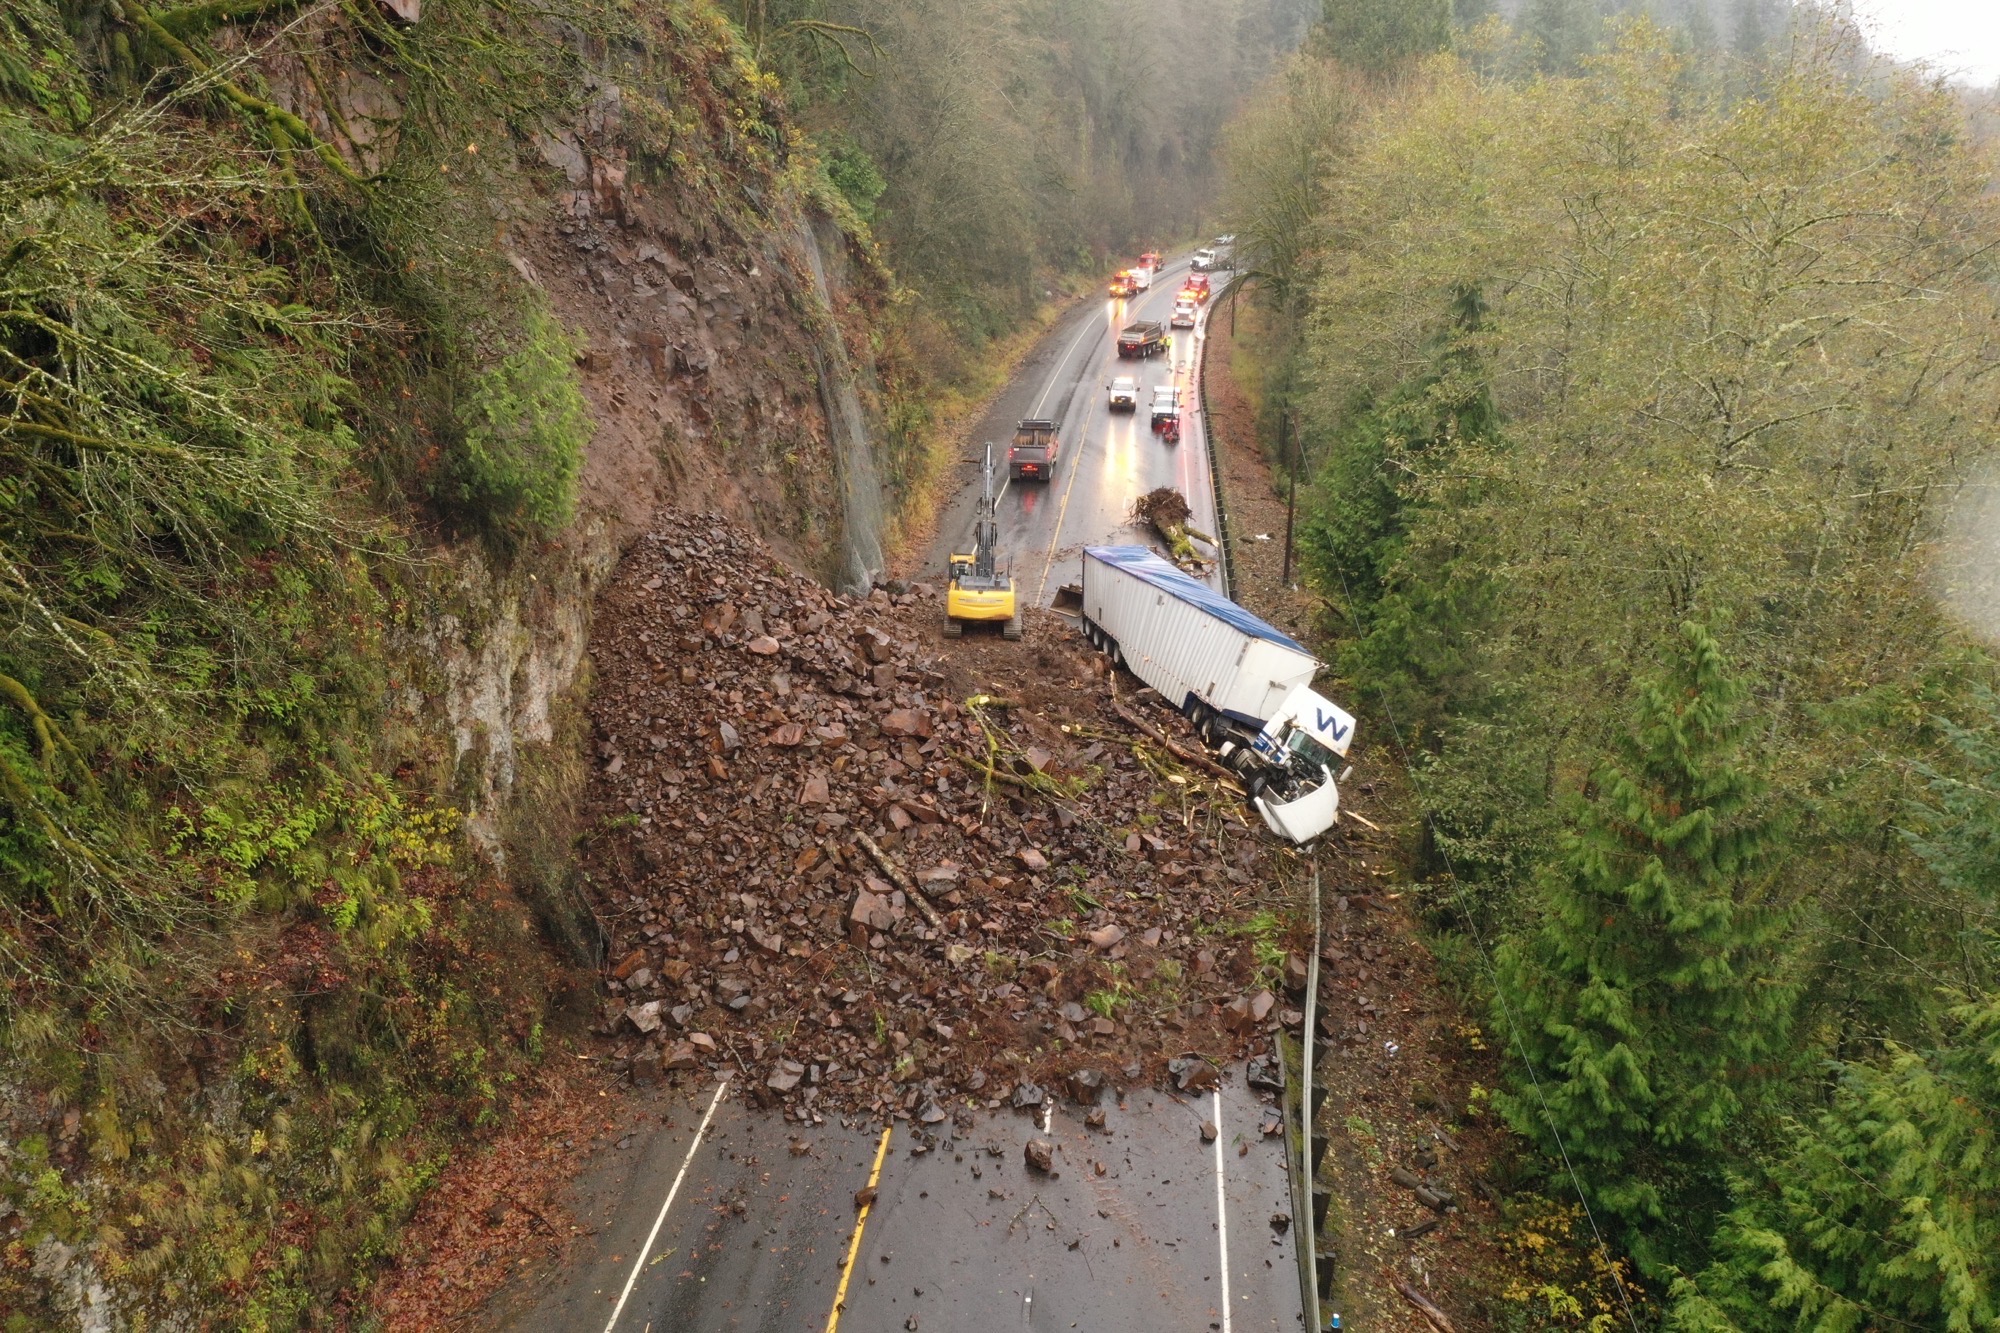 A landslide on the road on US 30 being removed by ODOT crews with the twisted remains of a semi in the debris field.